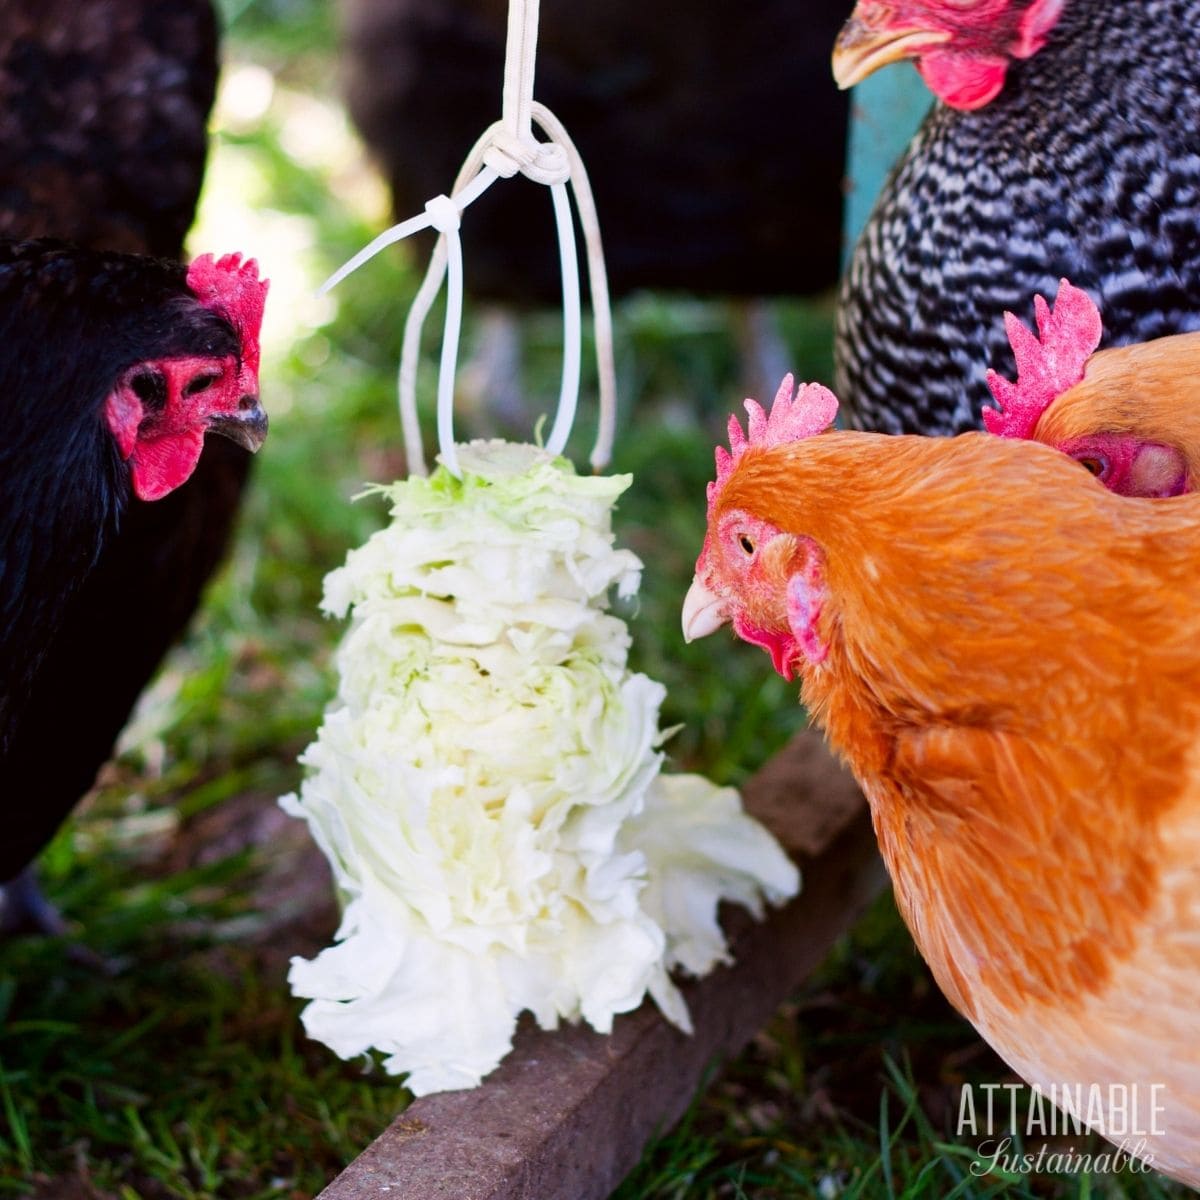 chickens eating a hanging head of cabbage.